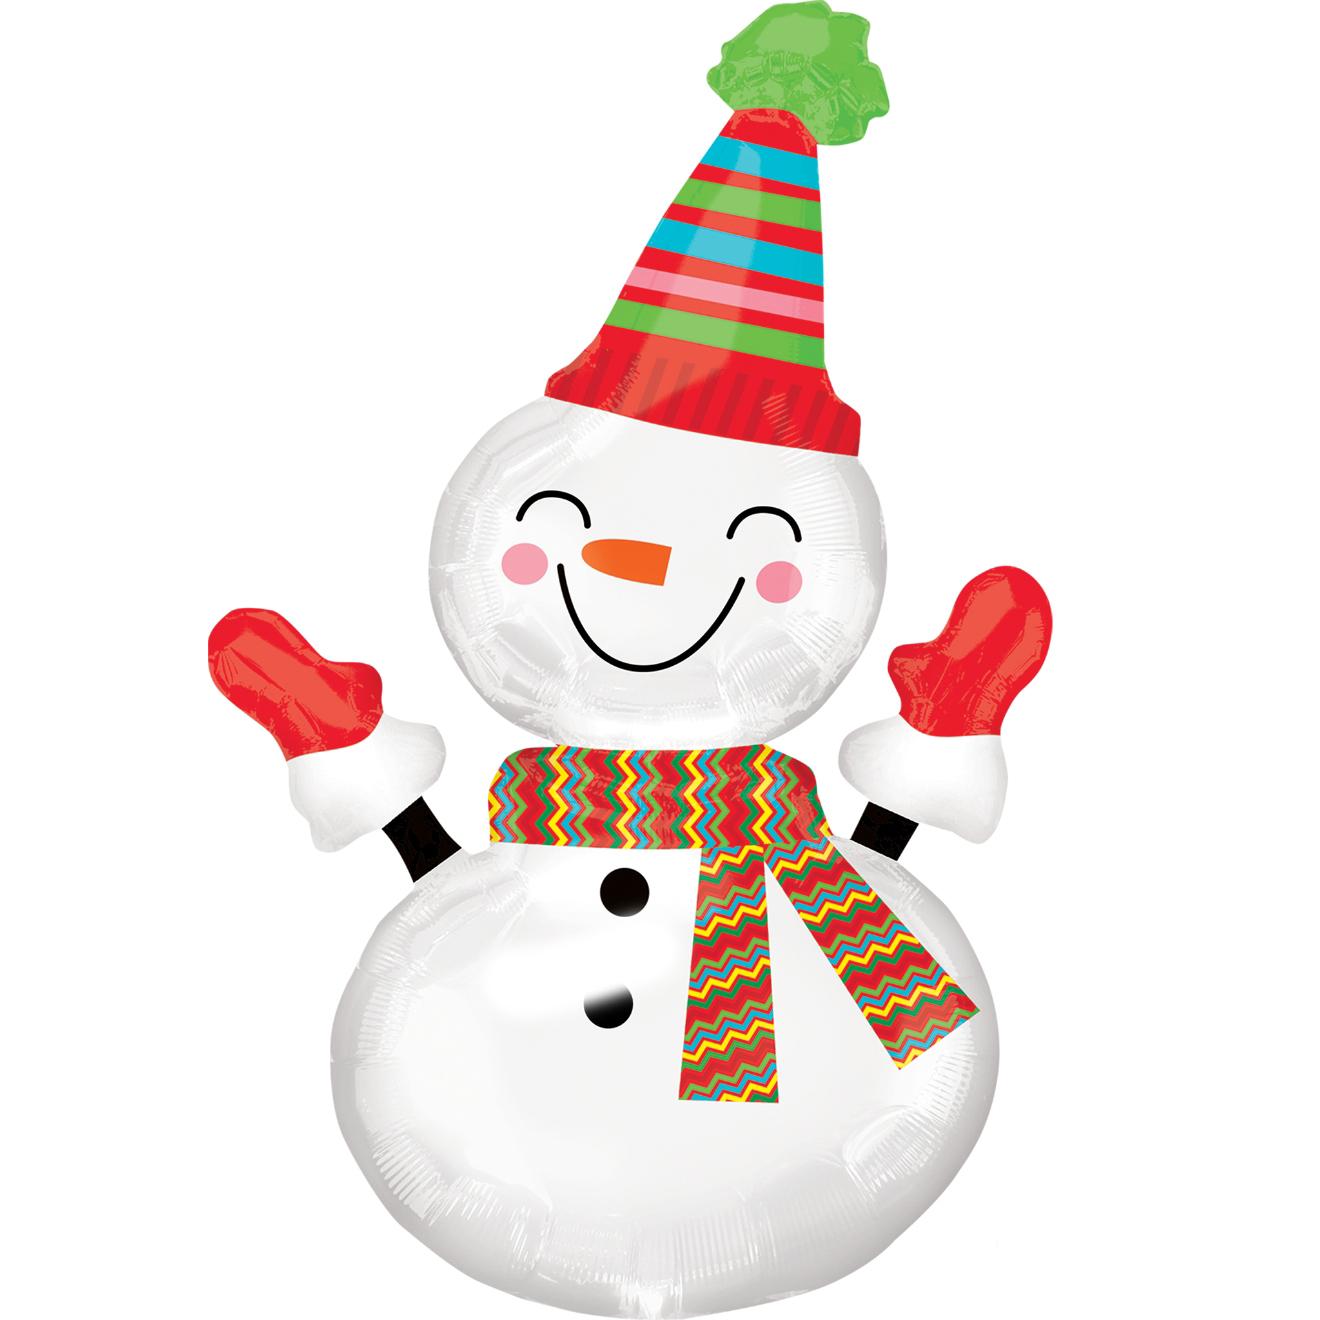 Smiley Snowman SuperShape Foil Balloon 24x35in Balloons & Streamers - Party Centre